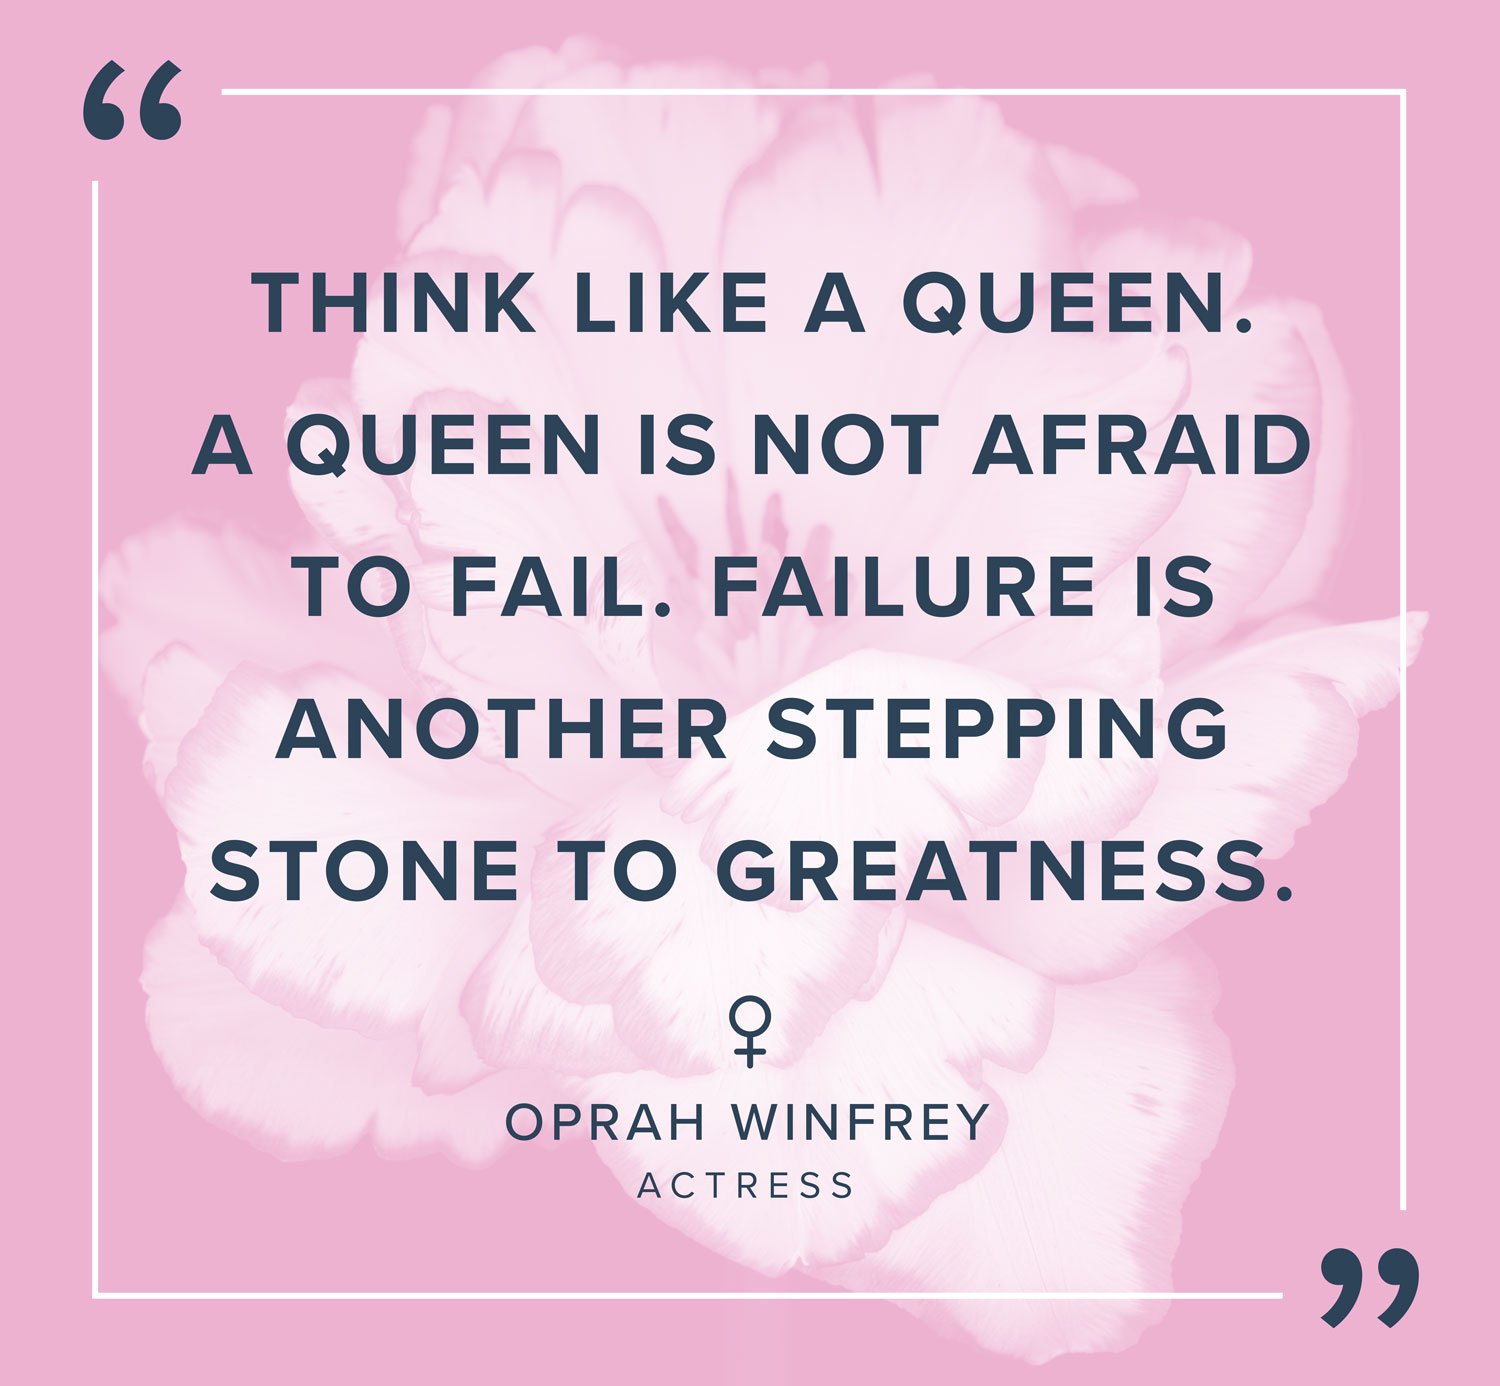 50 Empowering Quotes for Women